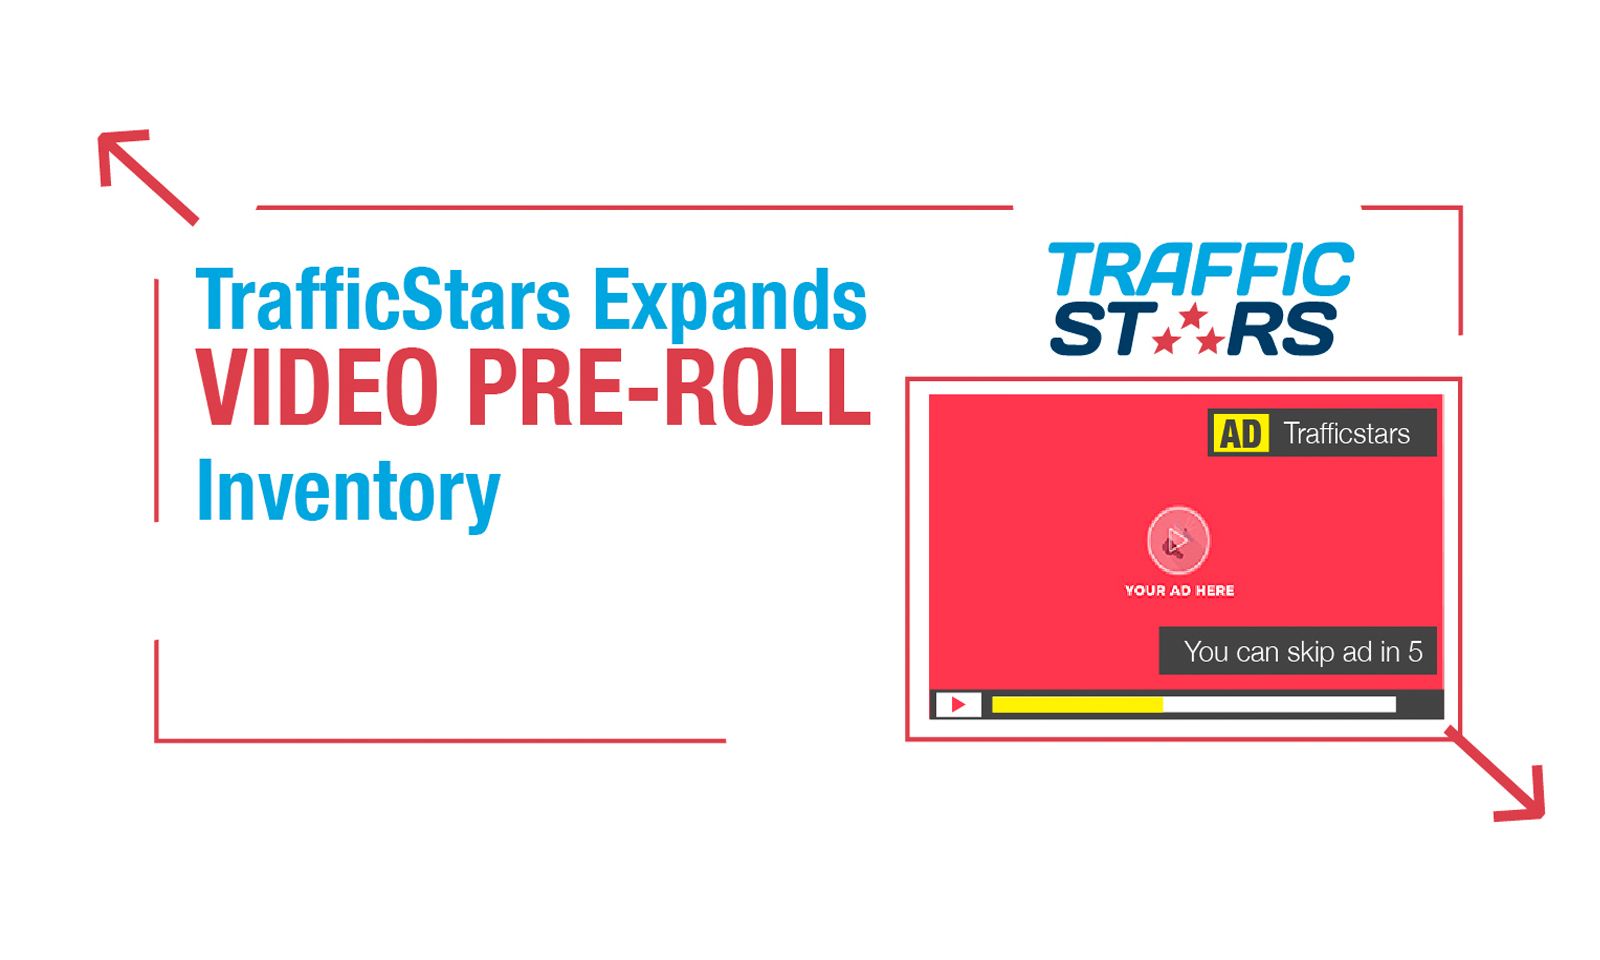 TrafficStars Expands Video Pre-Roll Inventory